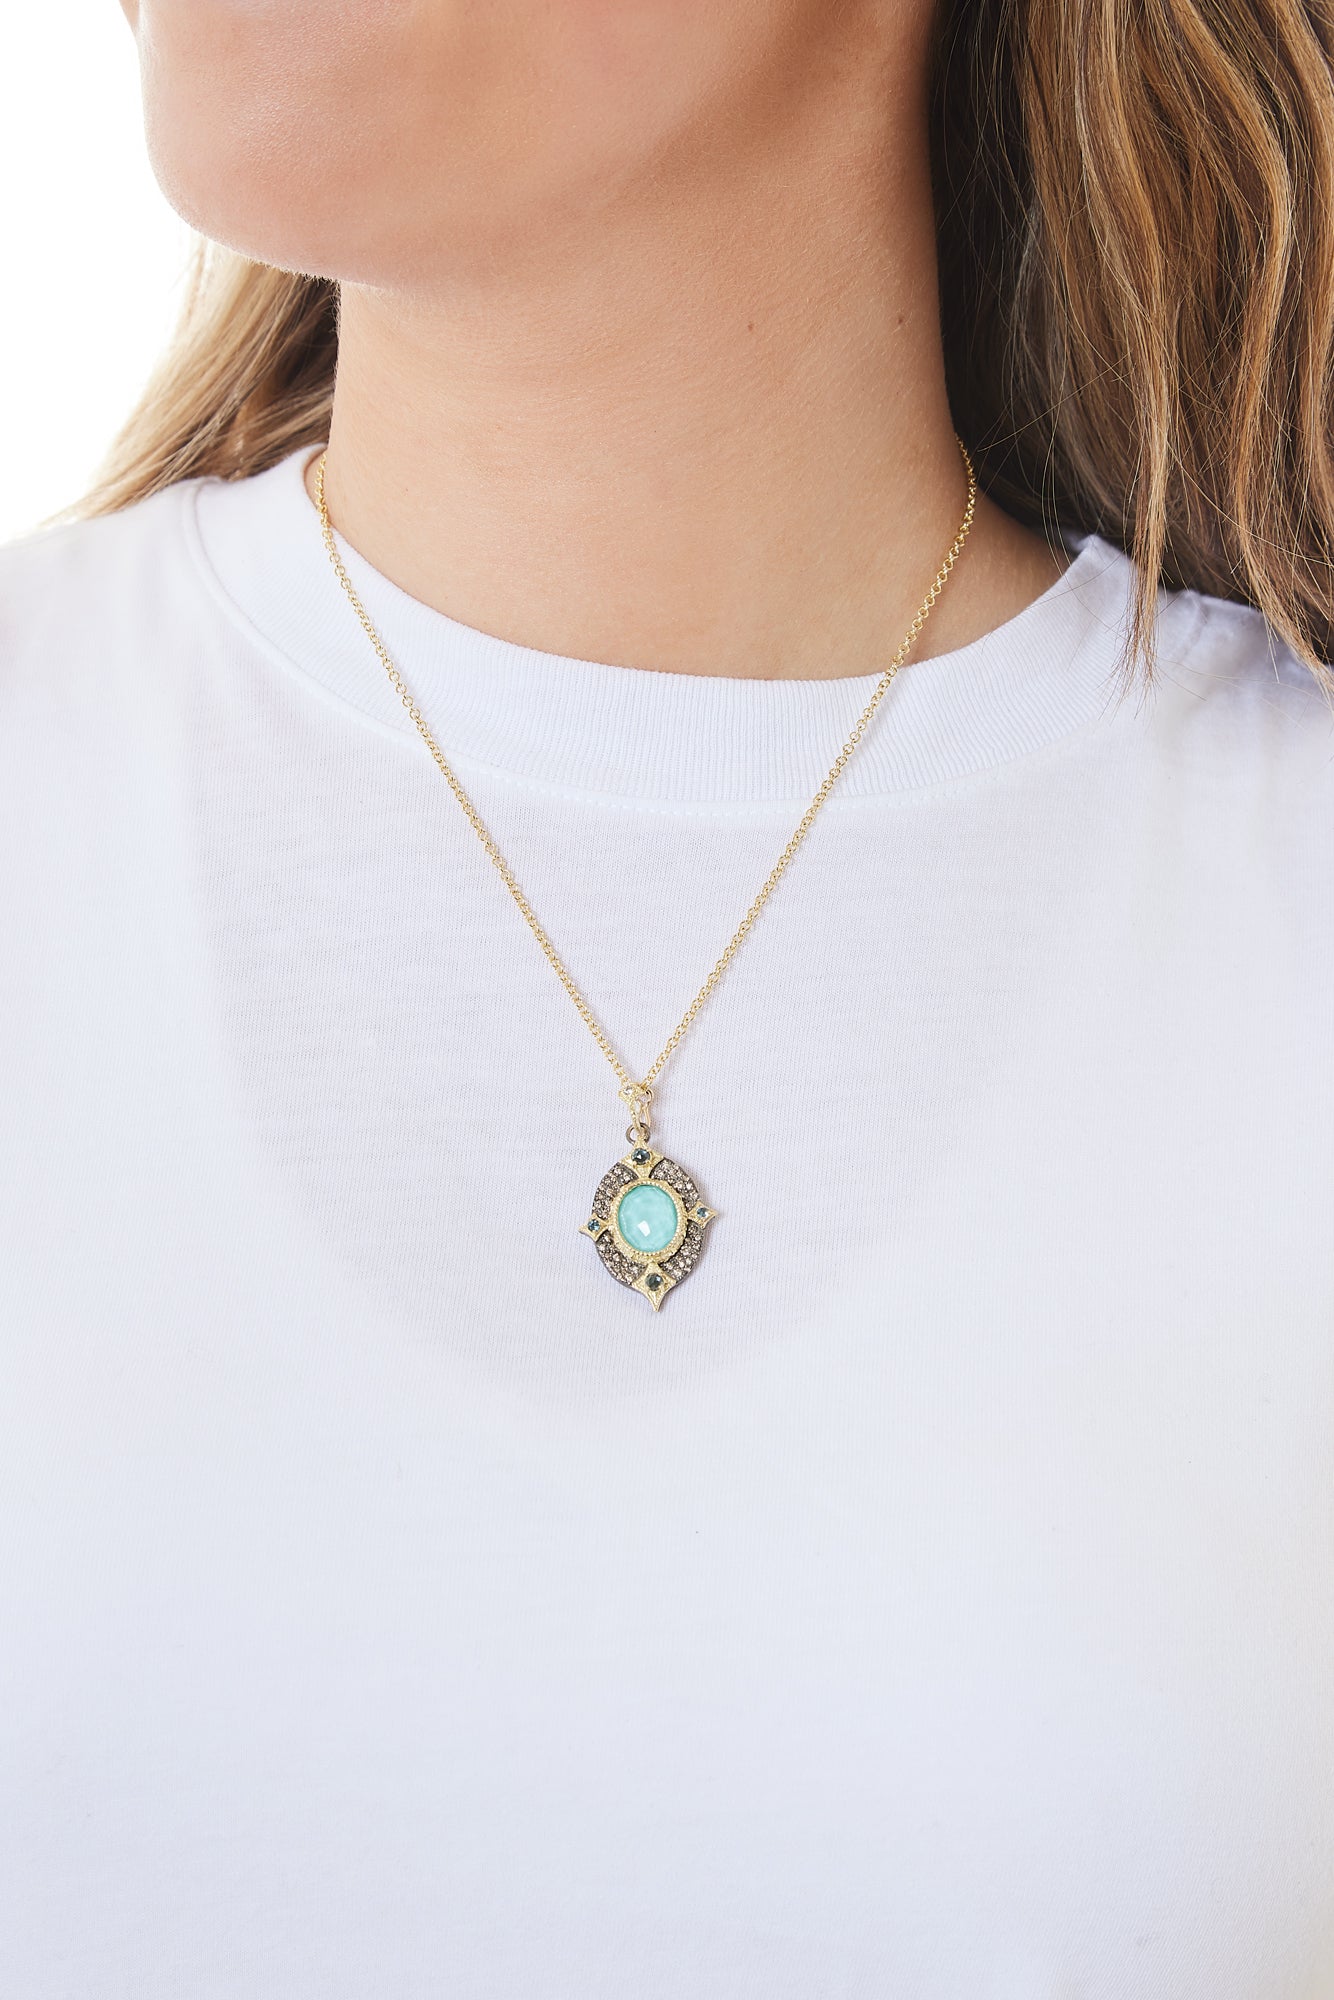 18KY Gold and Blue Turquoise Necklace Pendant